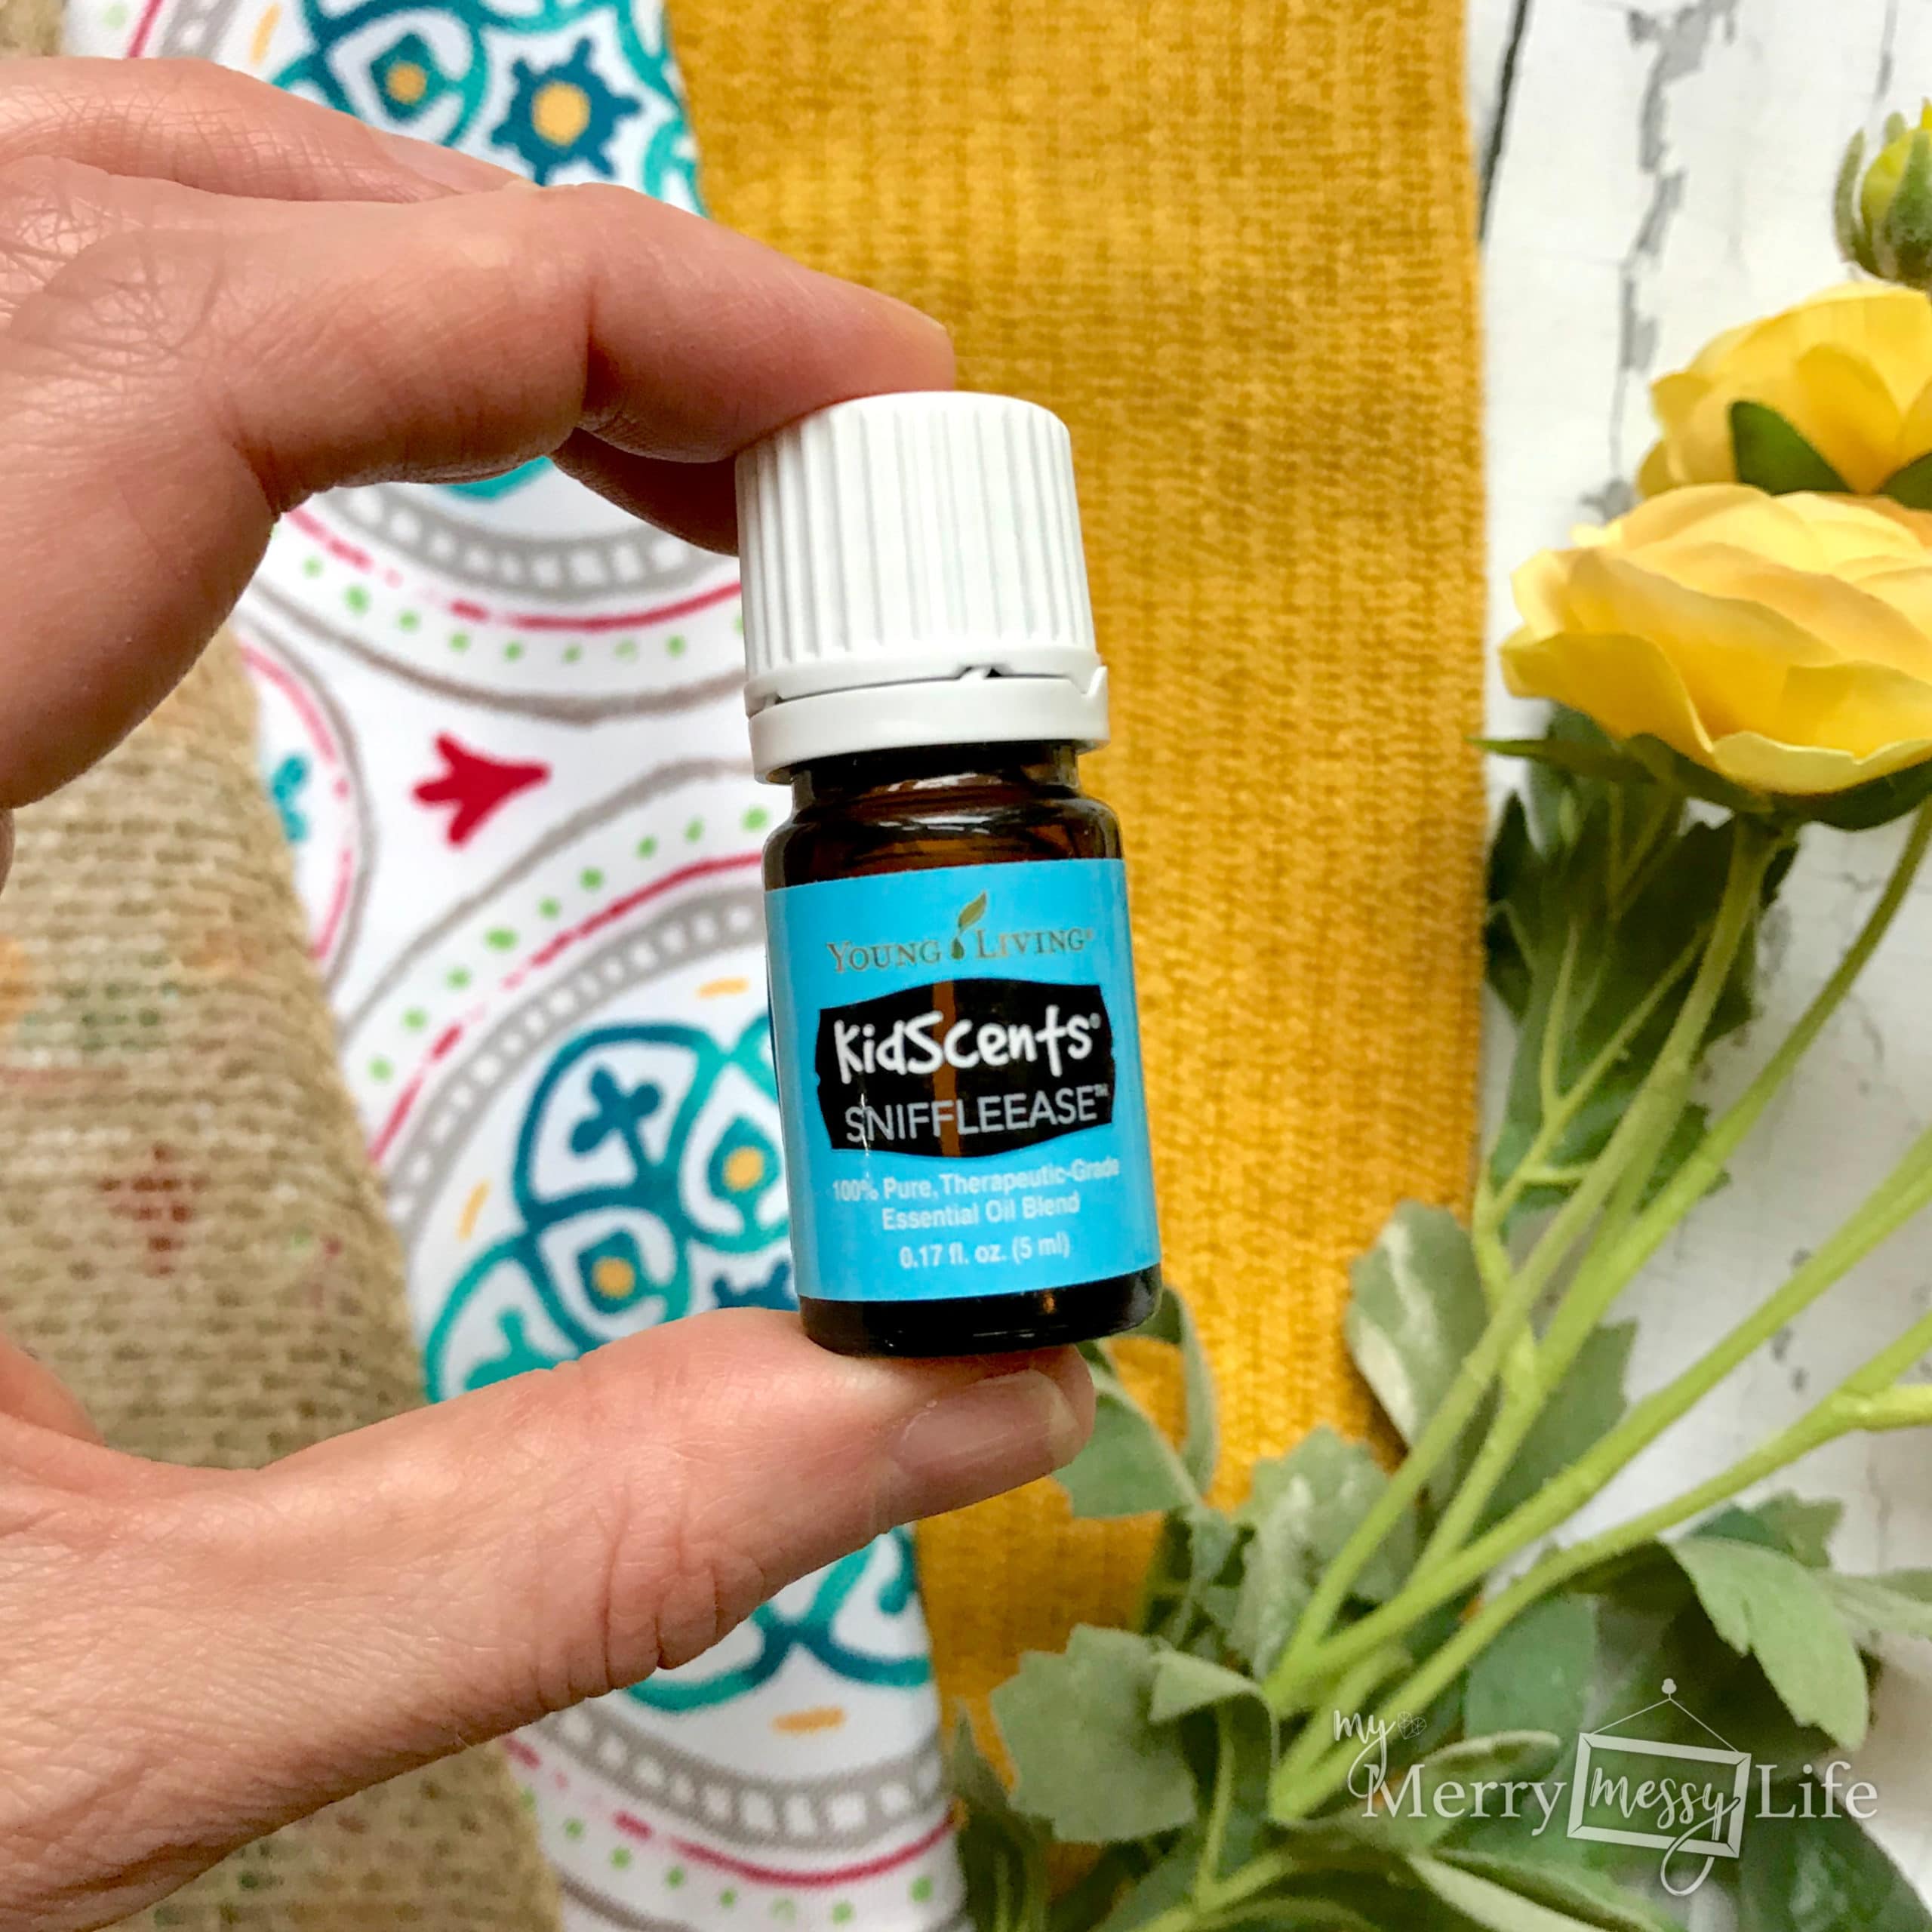 KidScents SniffleEase from Young Living Essential Oils